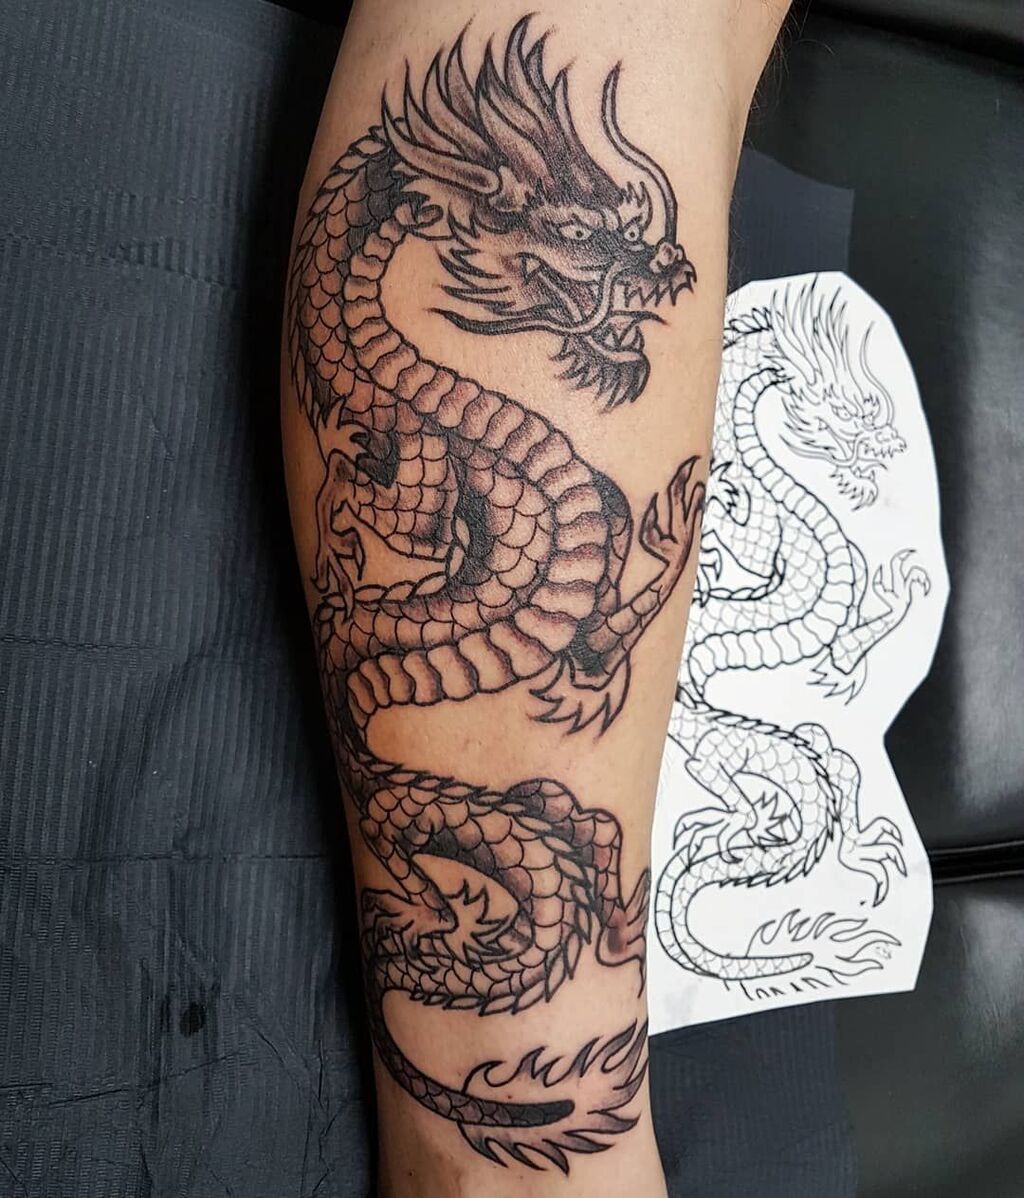 A tattoo of a dragon on the arm
